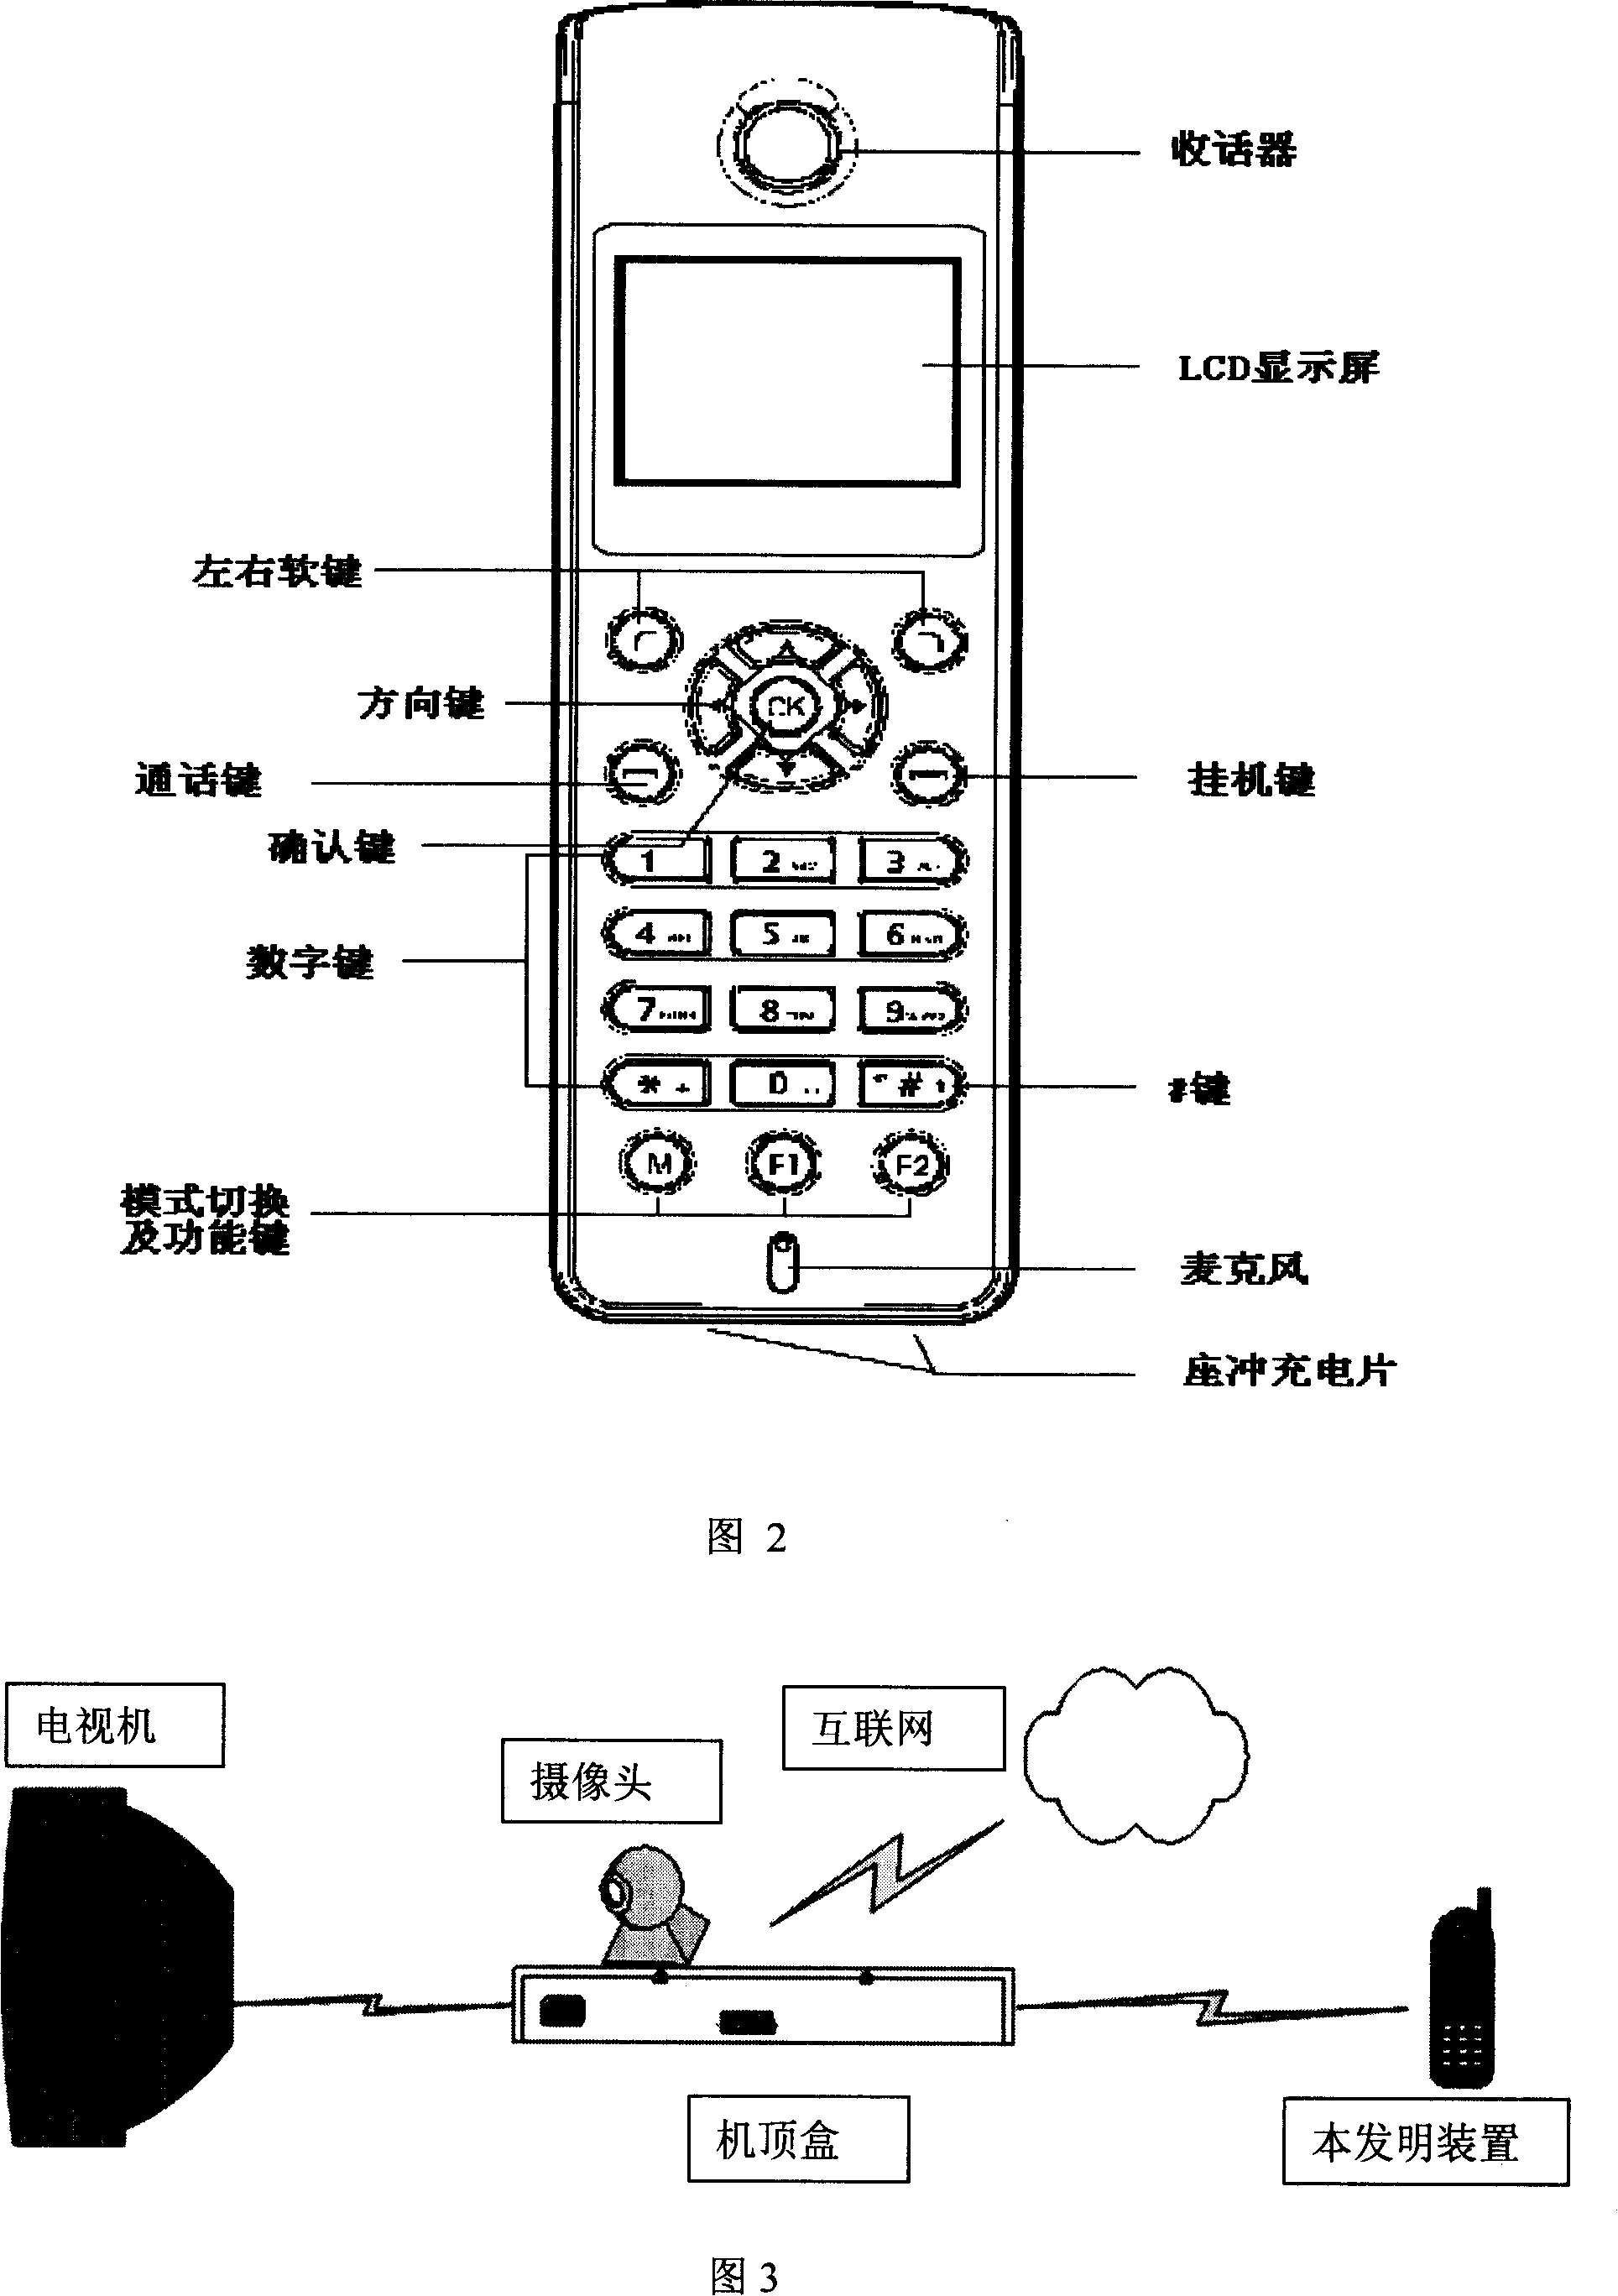 Blue tooth multifunctional remote controller device and method for implementing voice communication